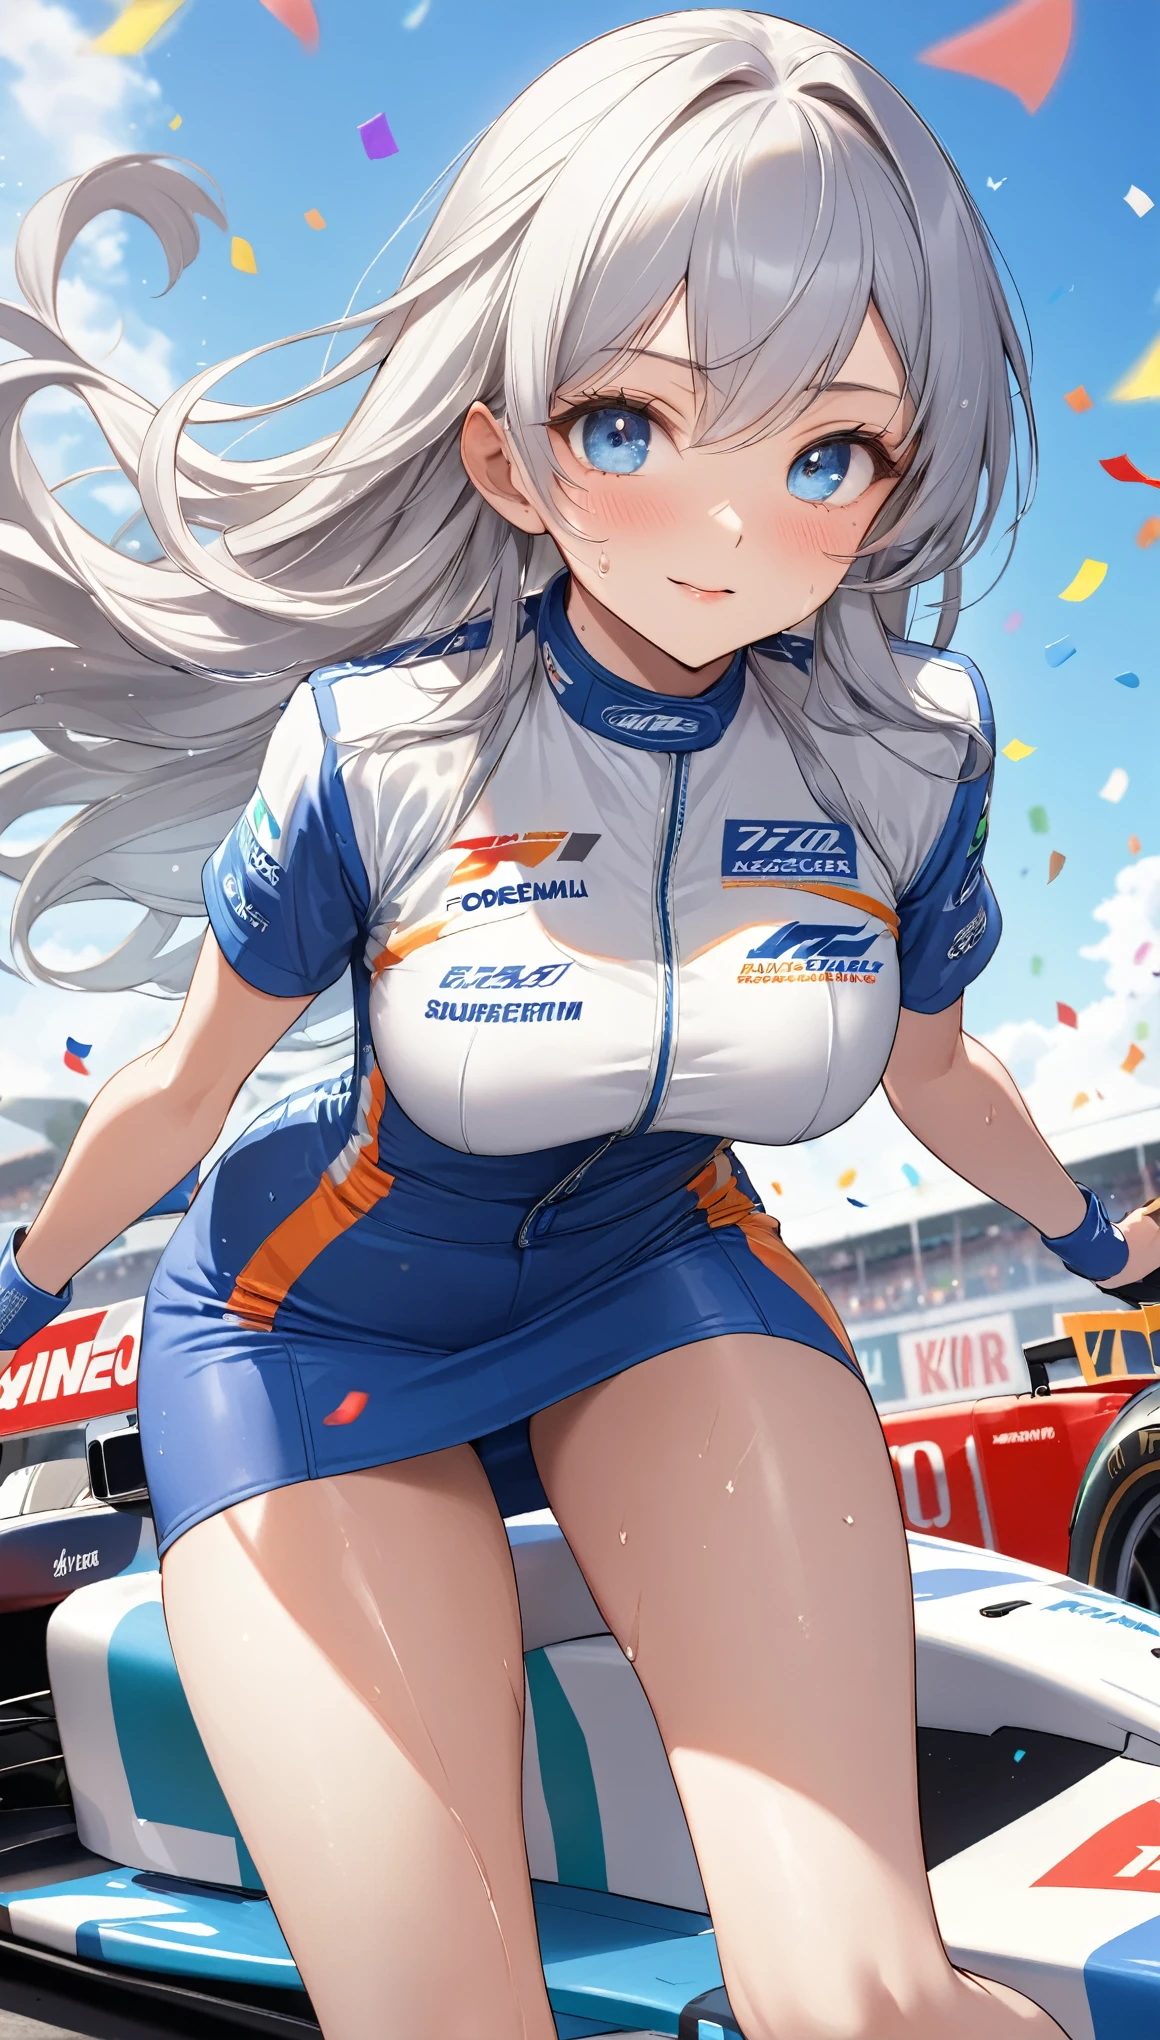 Highest quality, Super quality, 16K, Incredibly absurd, Very detailed, 2.5D, delicate and dynamic, blue sky, Confetti, Racing Car, flag, Small face, Extremely delicate facial expression, Delicate eye depiction, Extremely detailed hair, Upper body close-up, sole sexy lady, healthy shaped body, 22 years old lady, Race Queen, 170cm tall, big firm bouncing busts, white silver long hair, sexy long legs, Glowing Skin, Sweaty, Flashy Race Queen costume, blue tight skirt, white leather long boots, Formula 1, Auto Racing Track